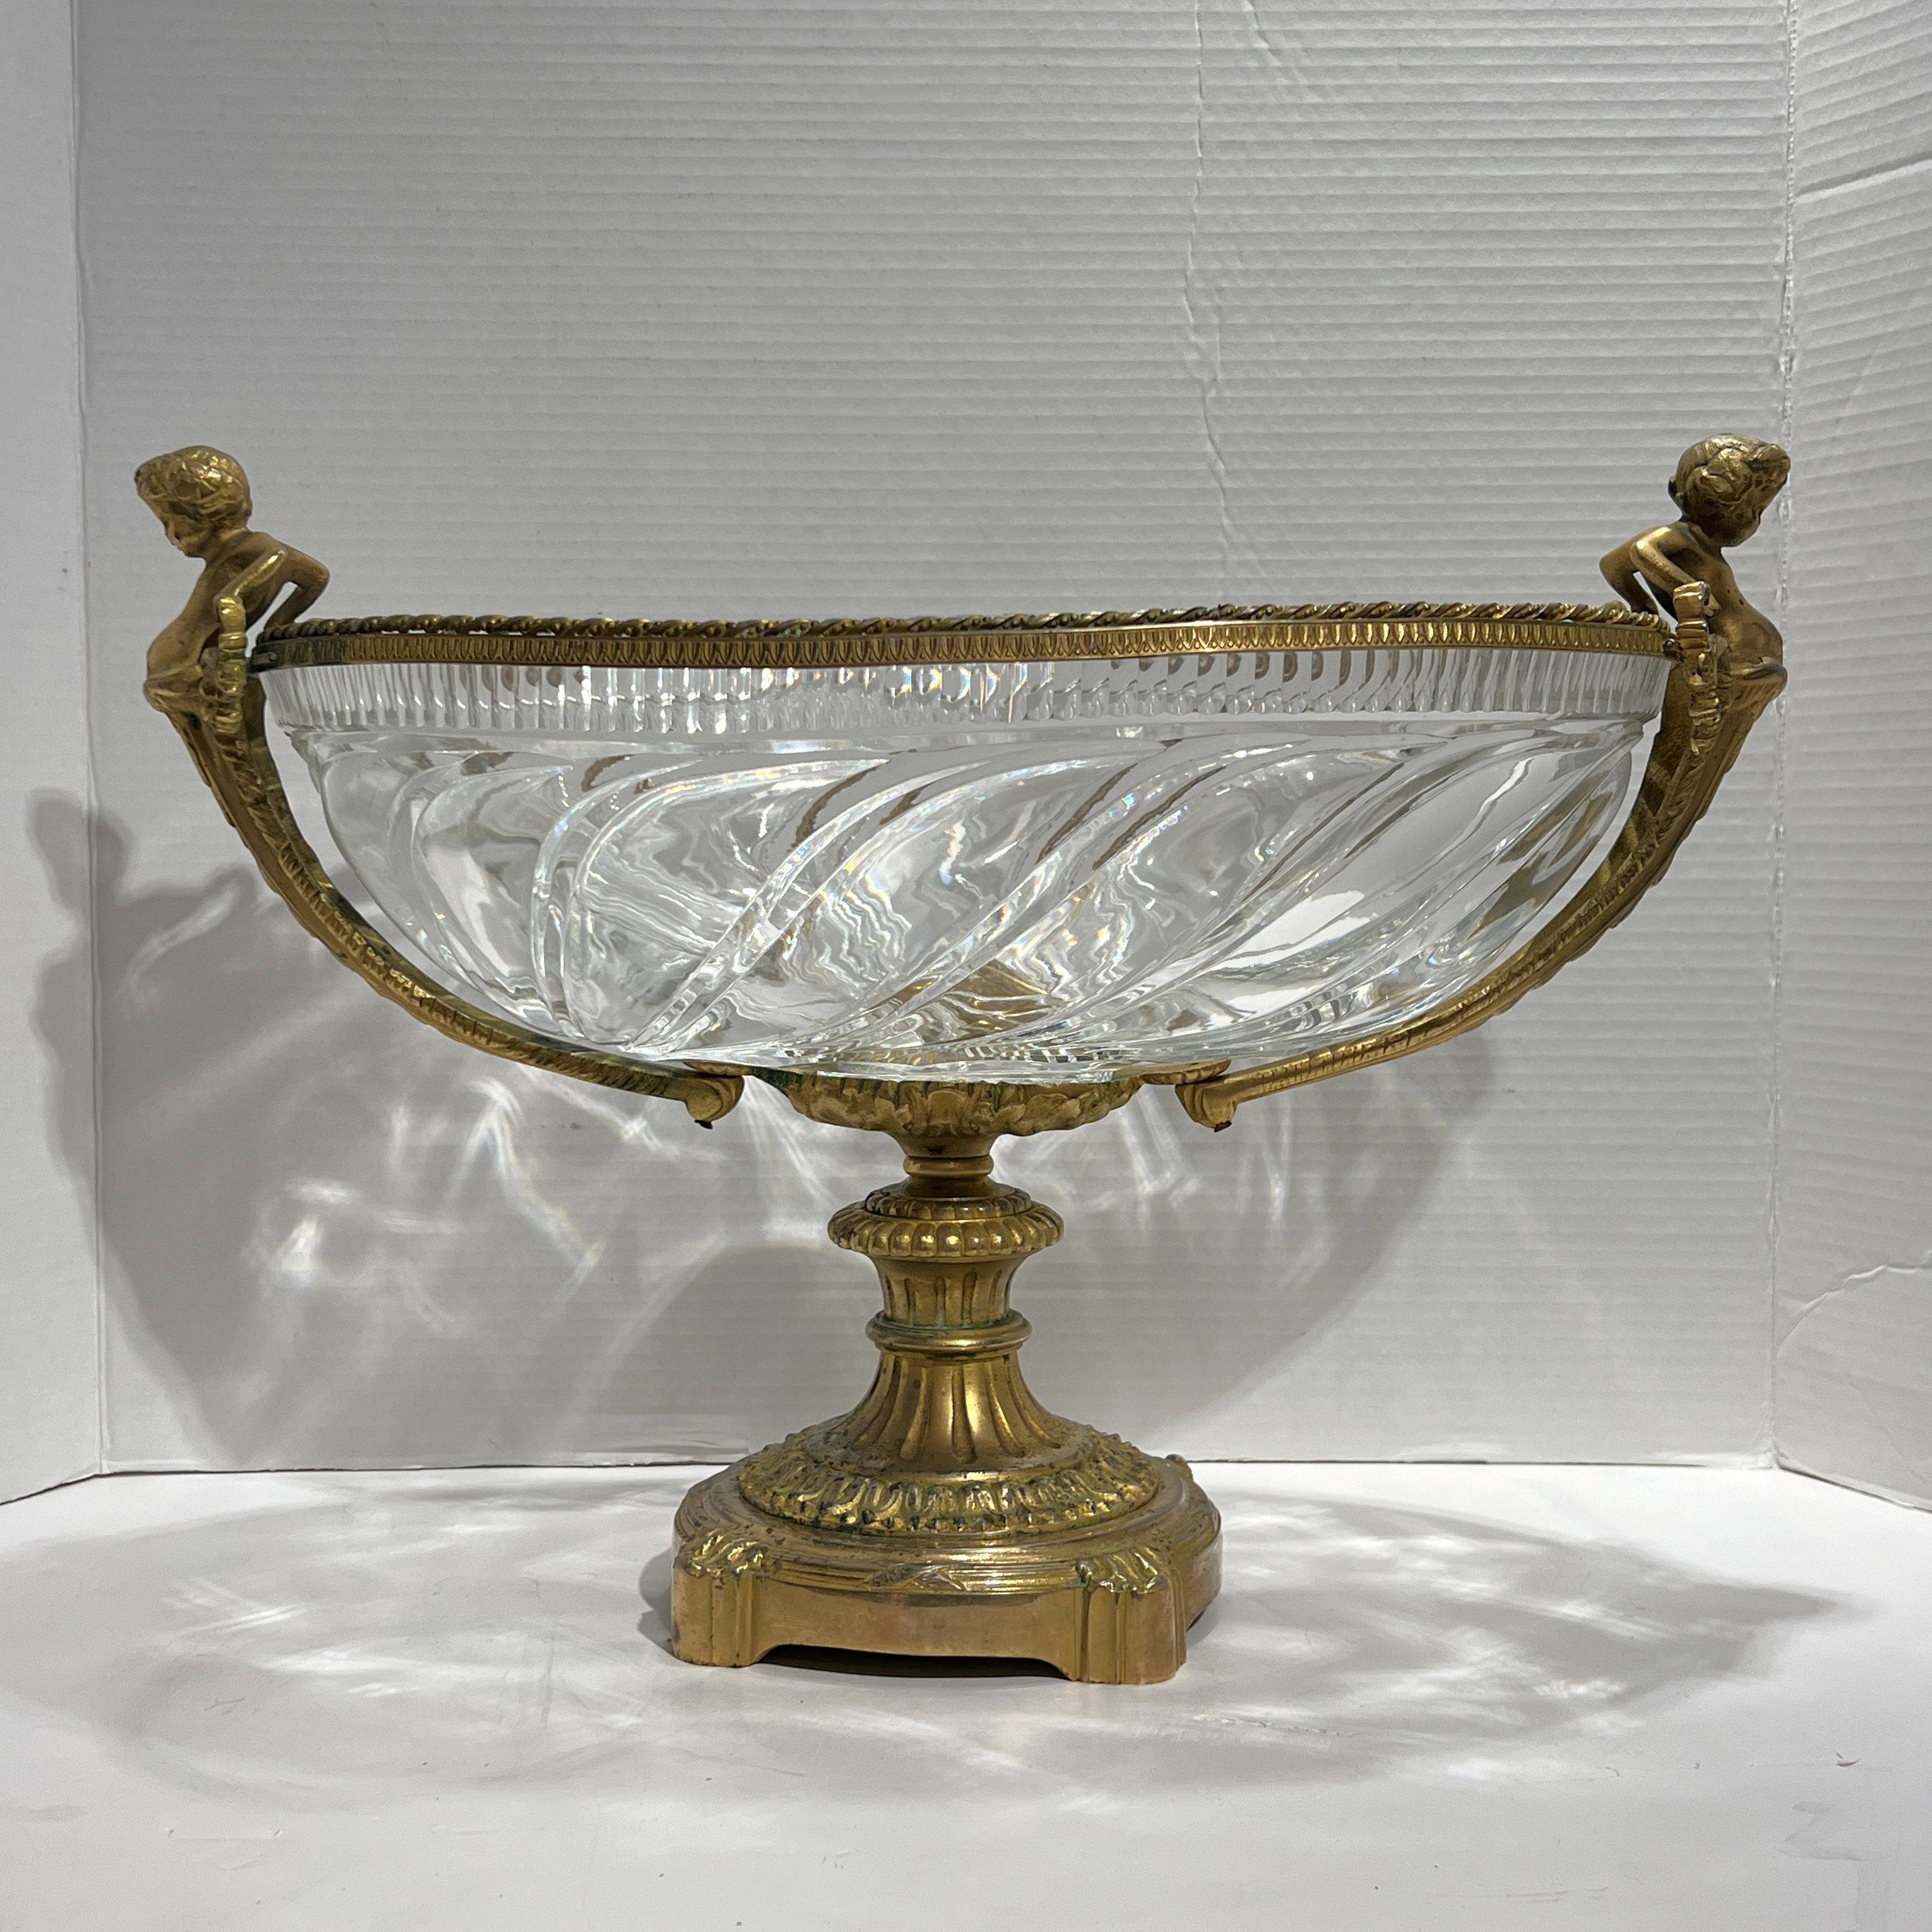 French Baccarat style Gilt Bronze Mounted Crystal Glass Centerpiece Bowl